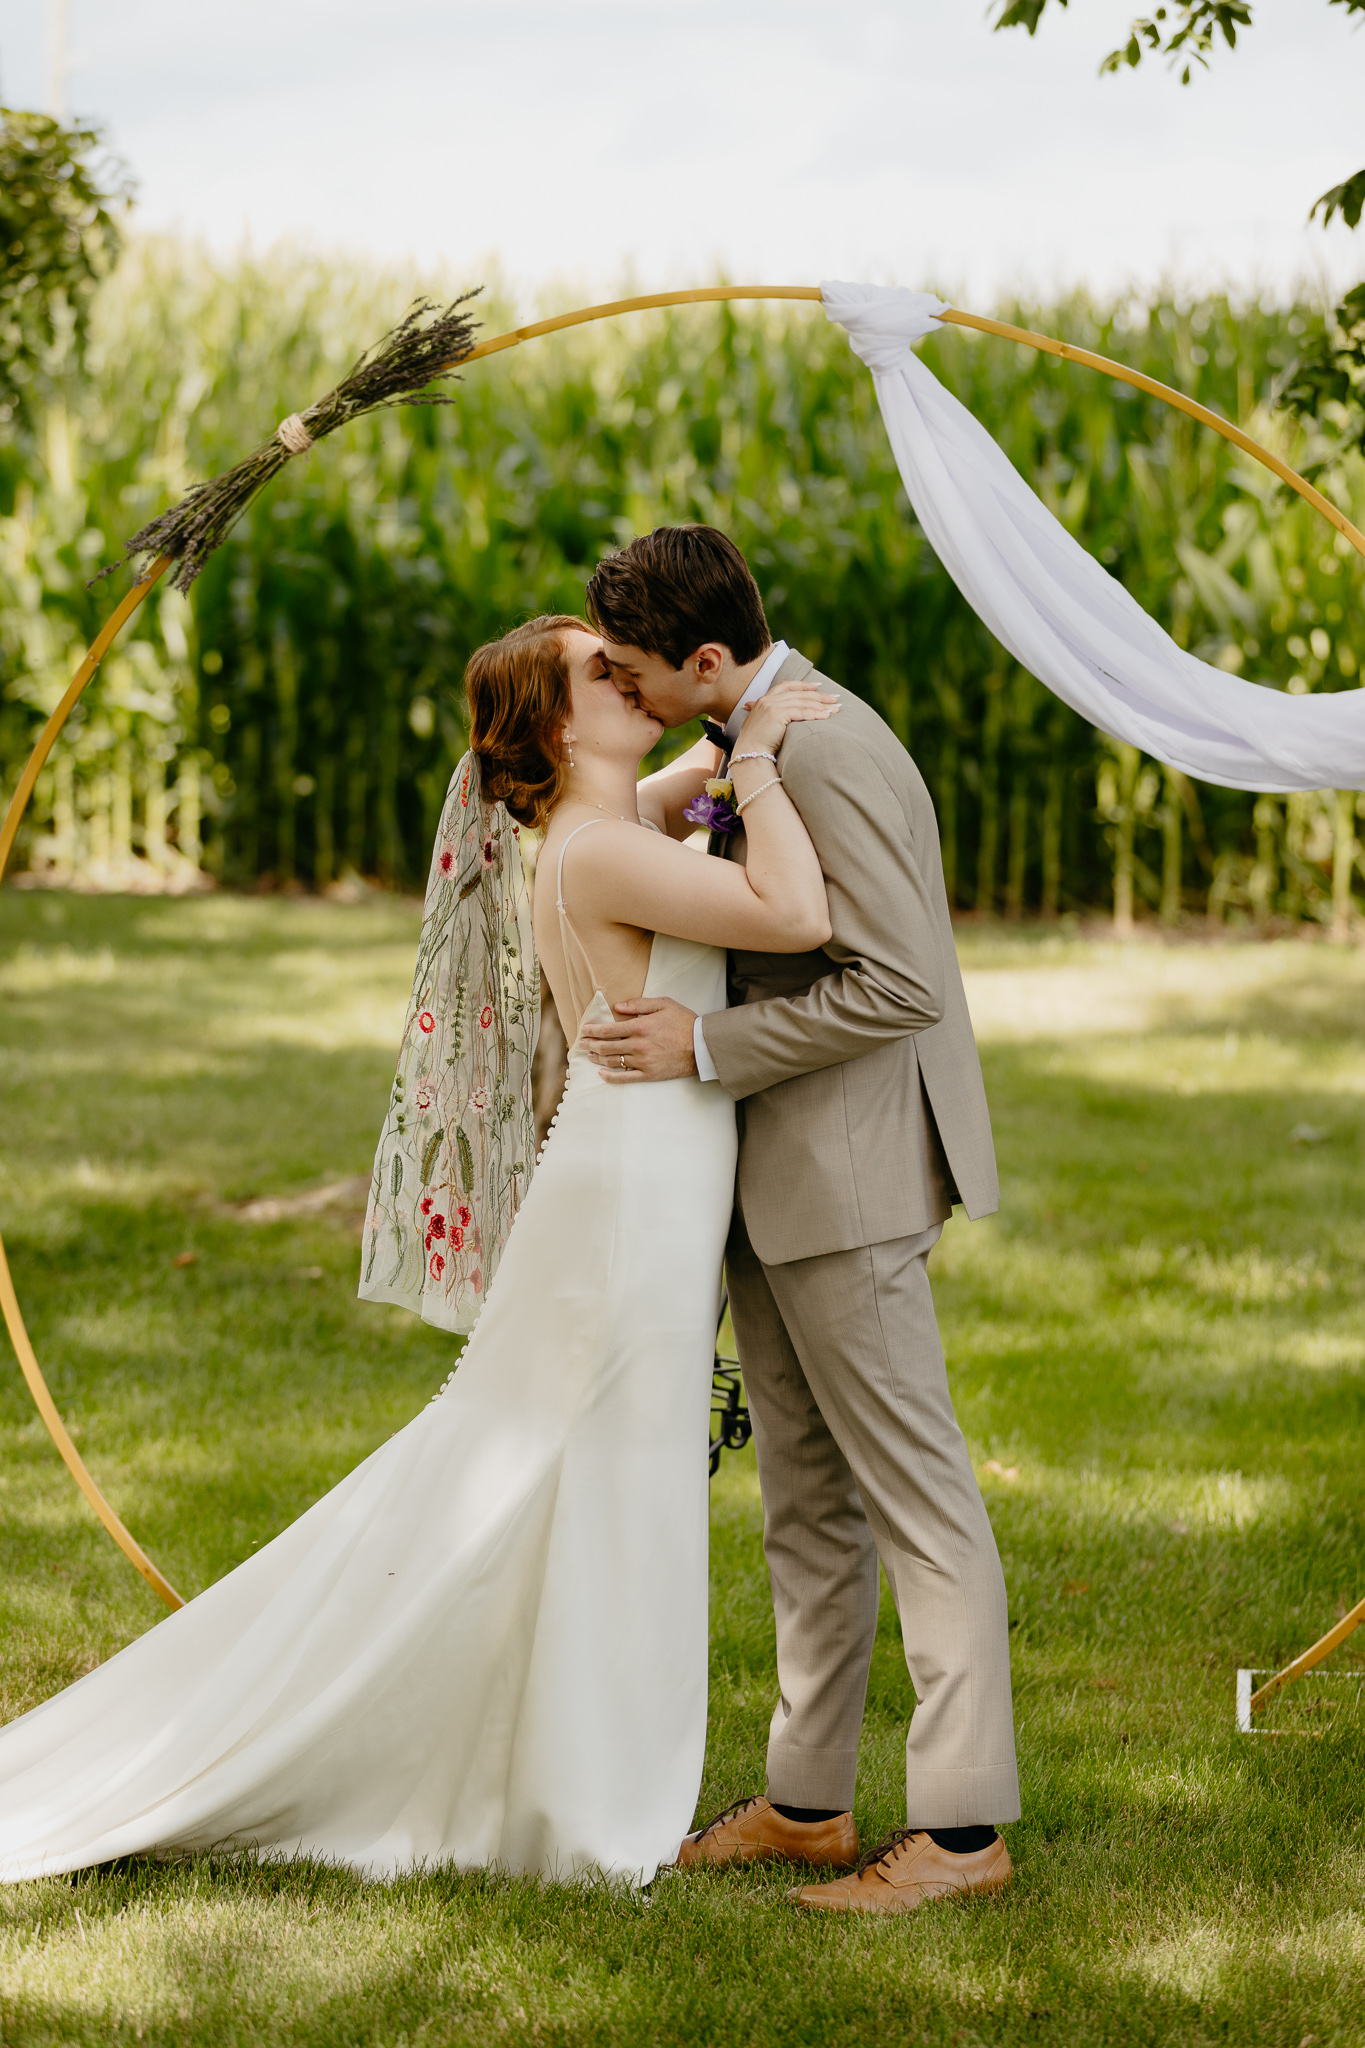 Intimate Indiana Outdoor Wedding in Summer // Ceremony & First Kiss